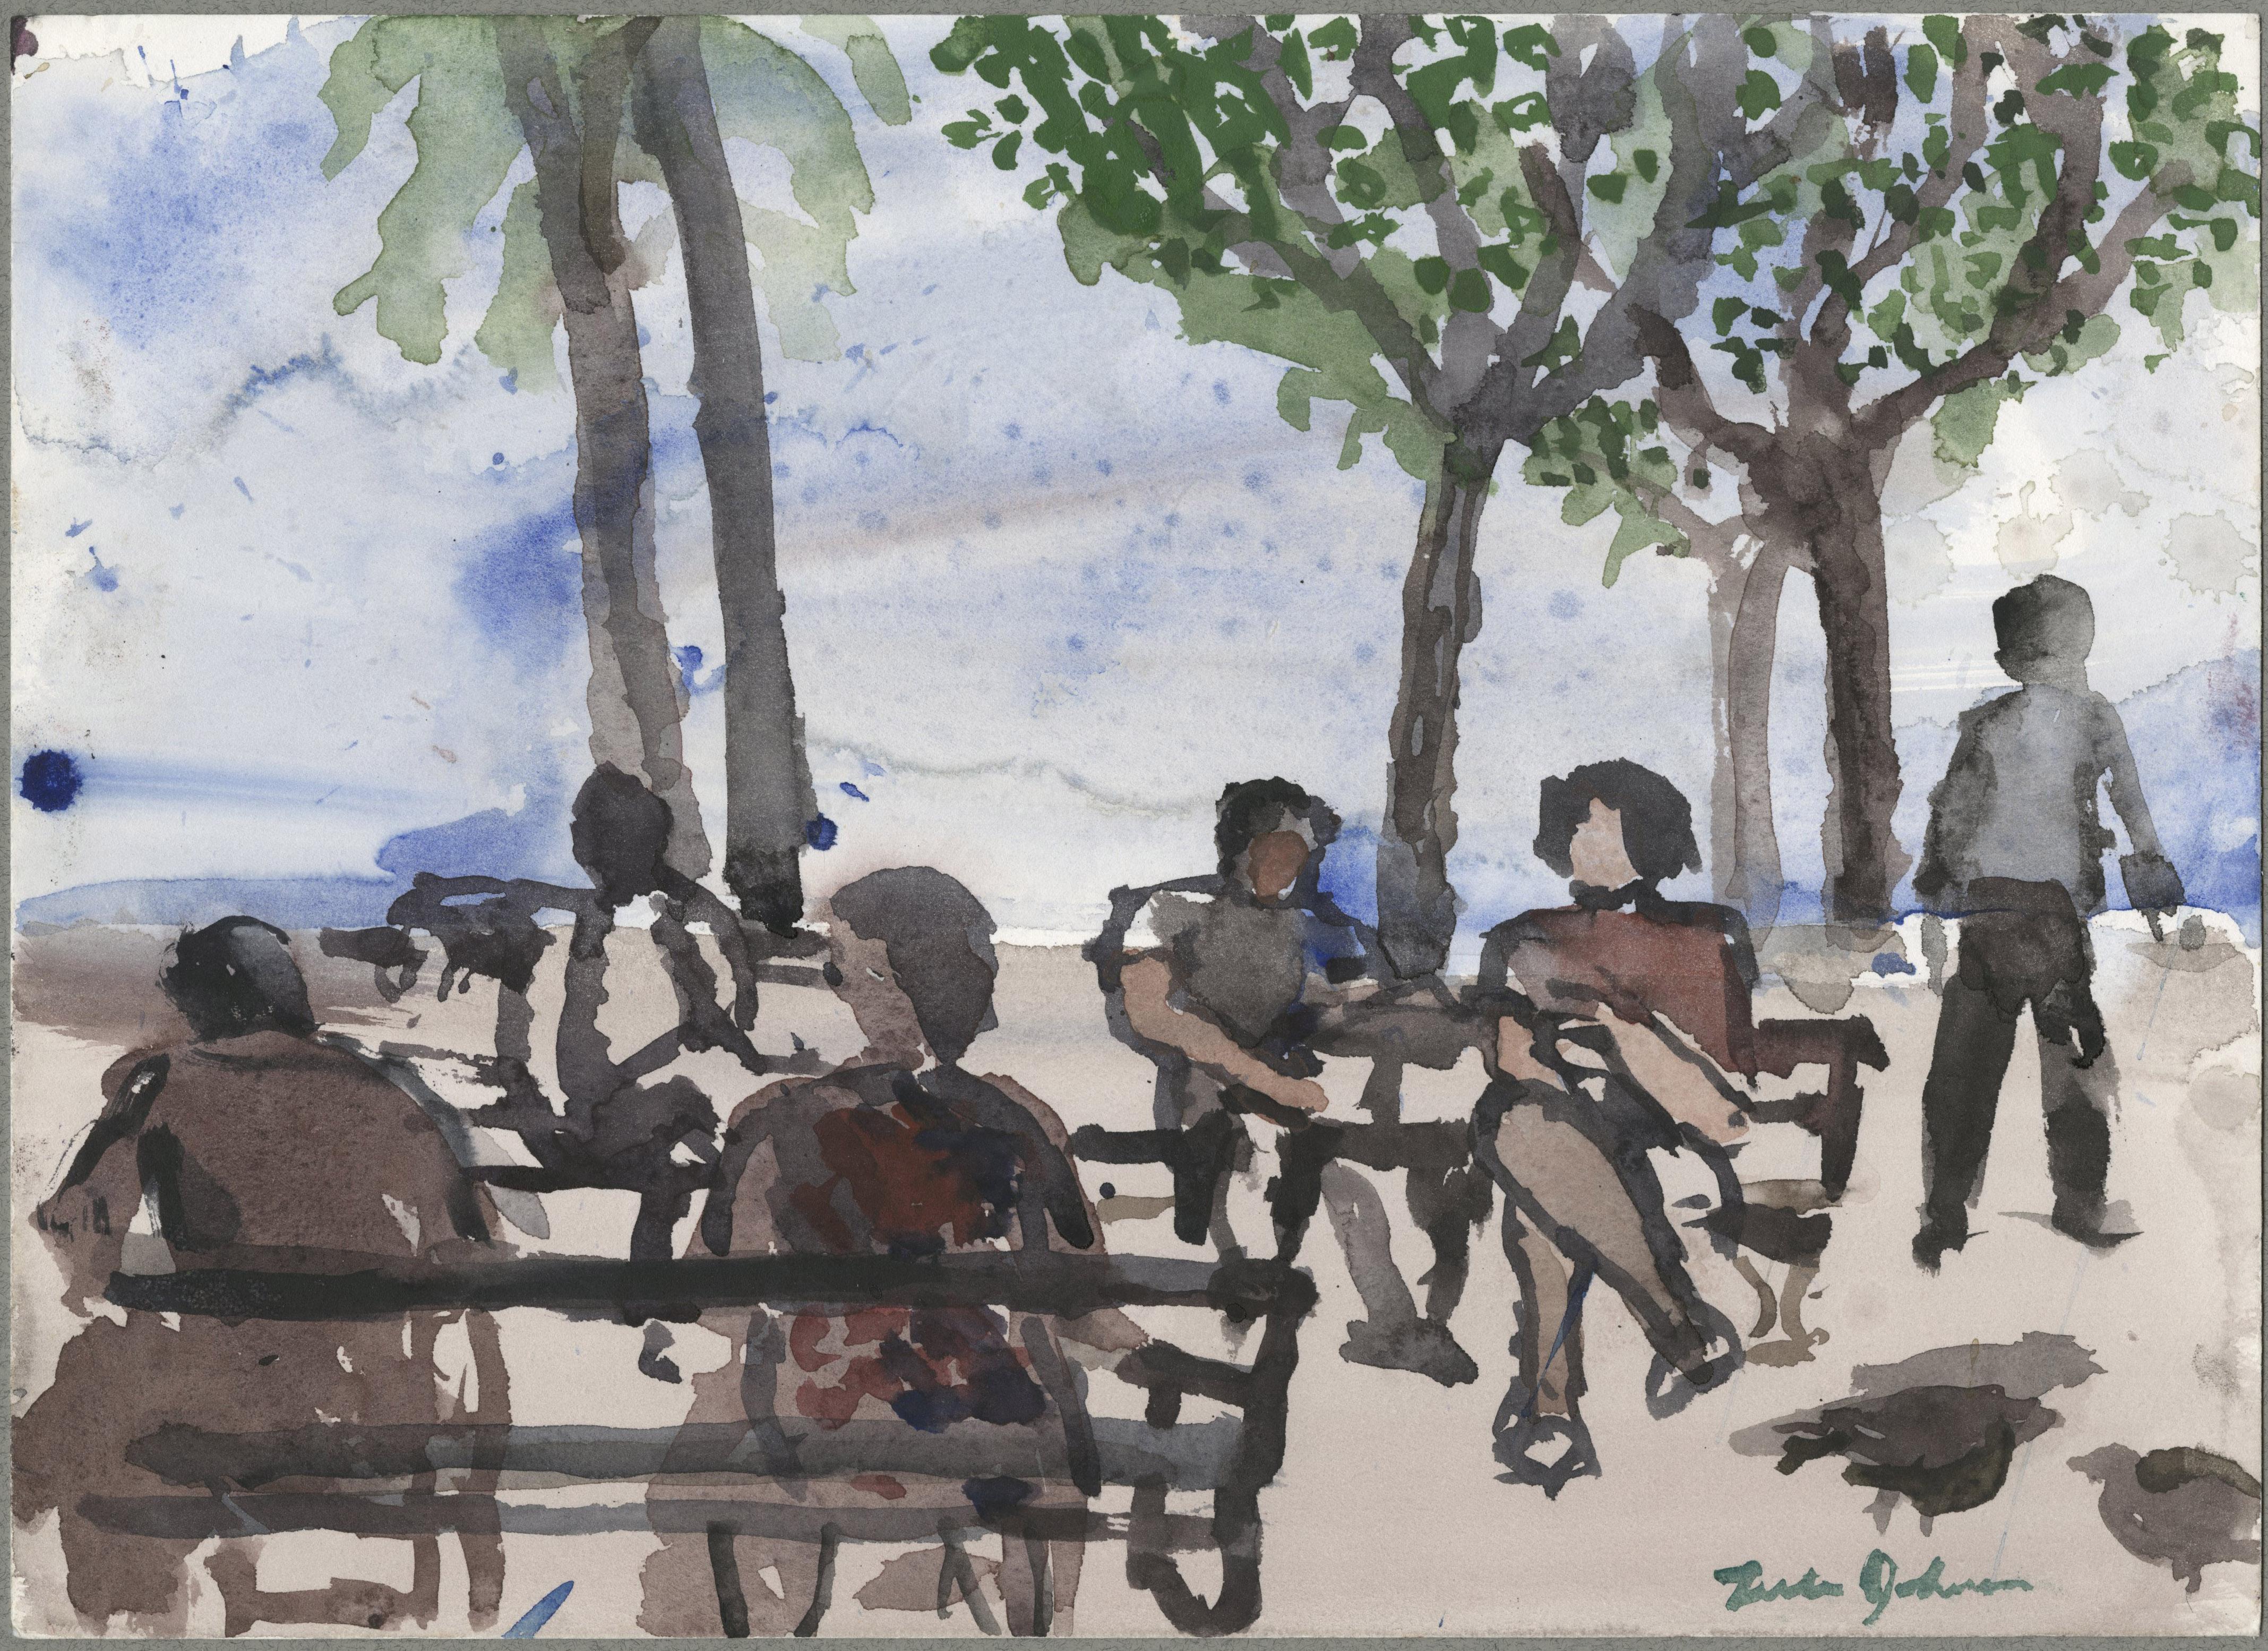 Untitled (Figures in a park)